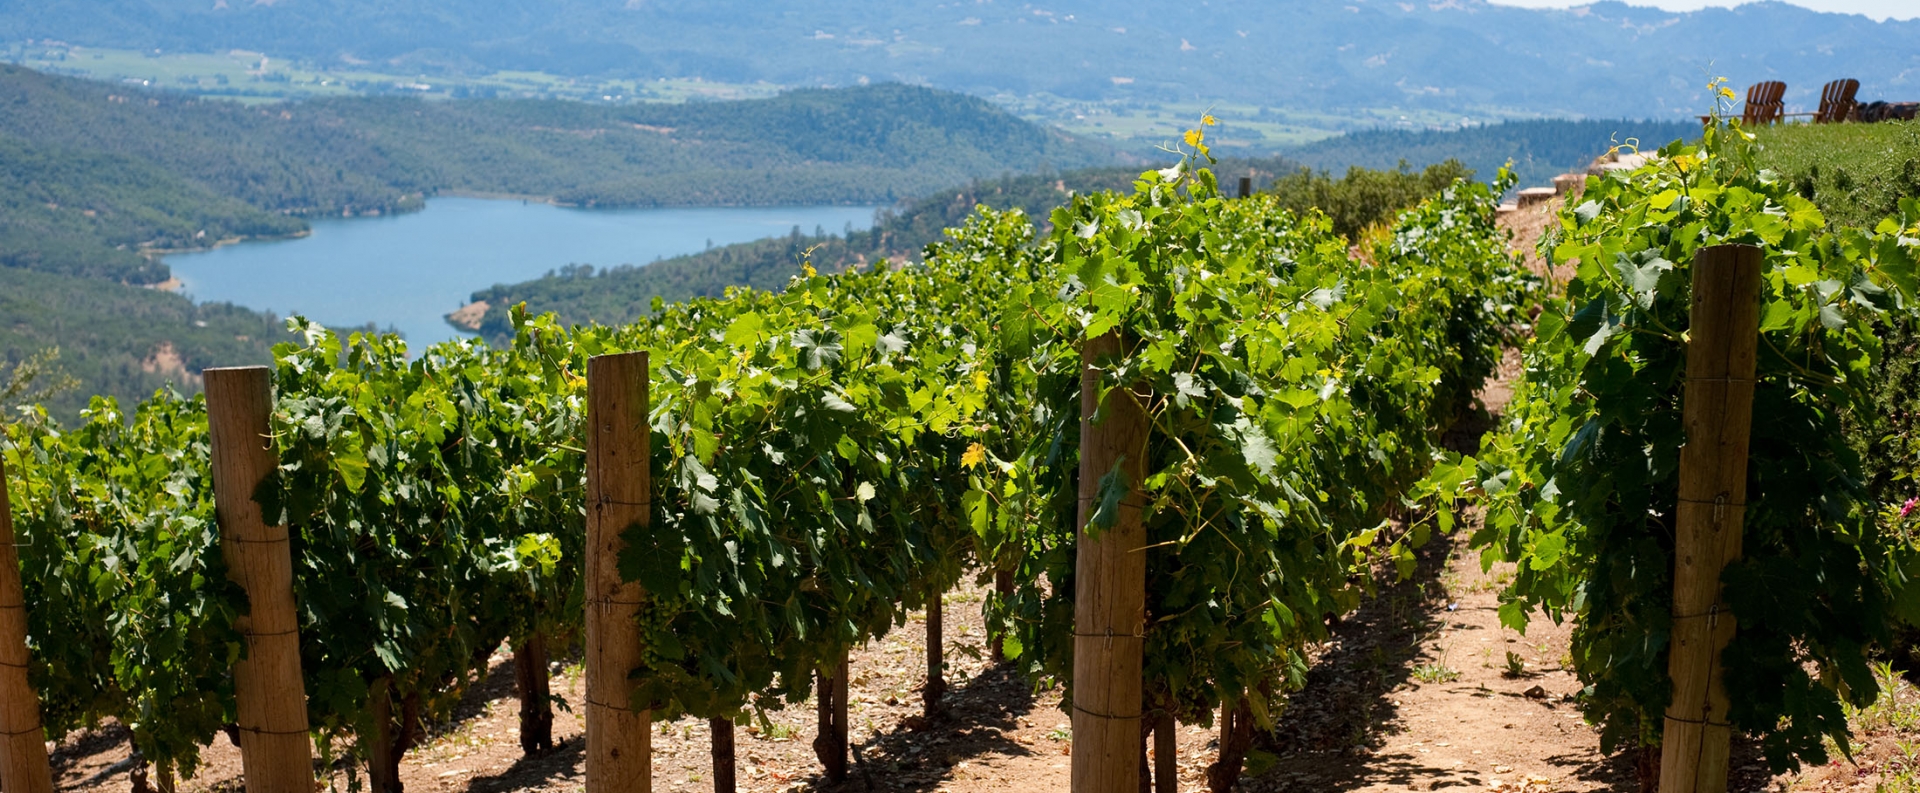 Rows of hillside vineyards above Napa Valley, lake in background.